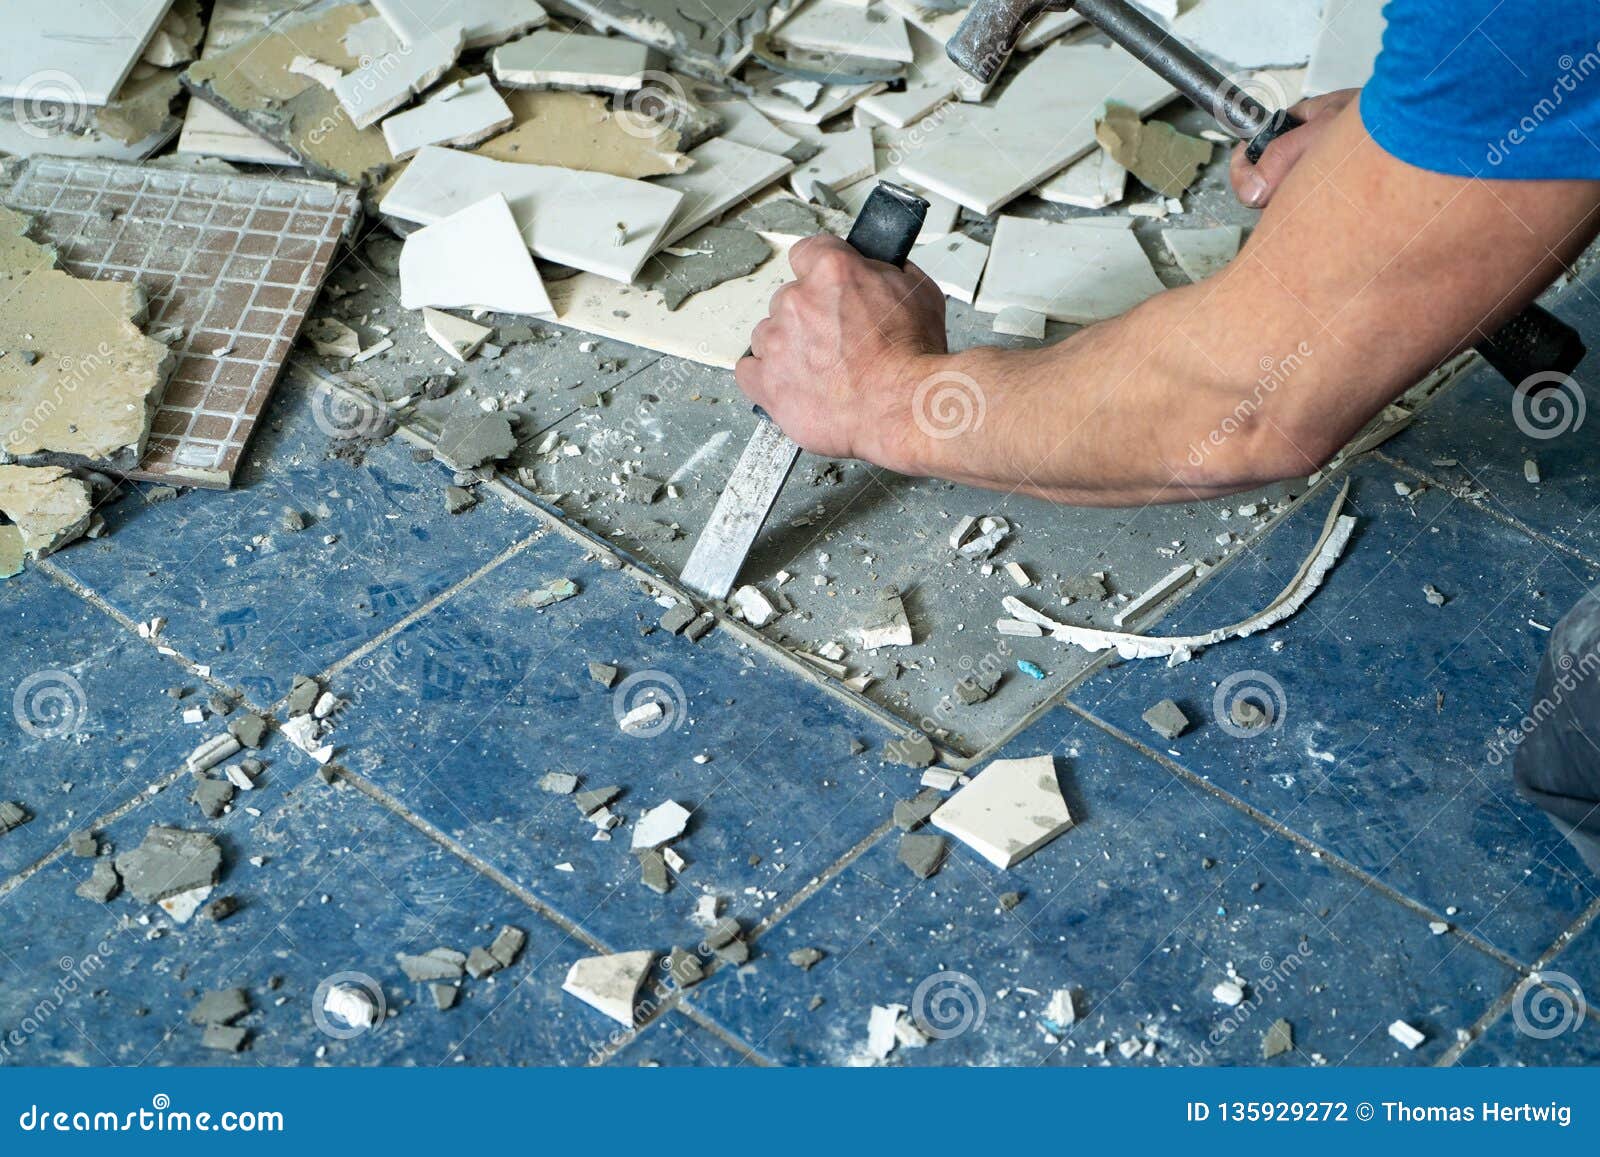 worker remove, demolish old tiles in a bathroom with hammer and chisel